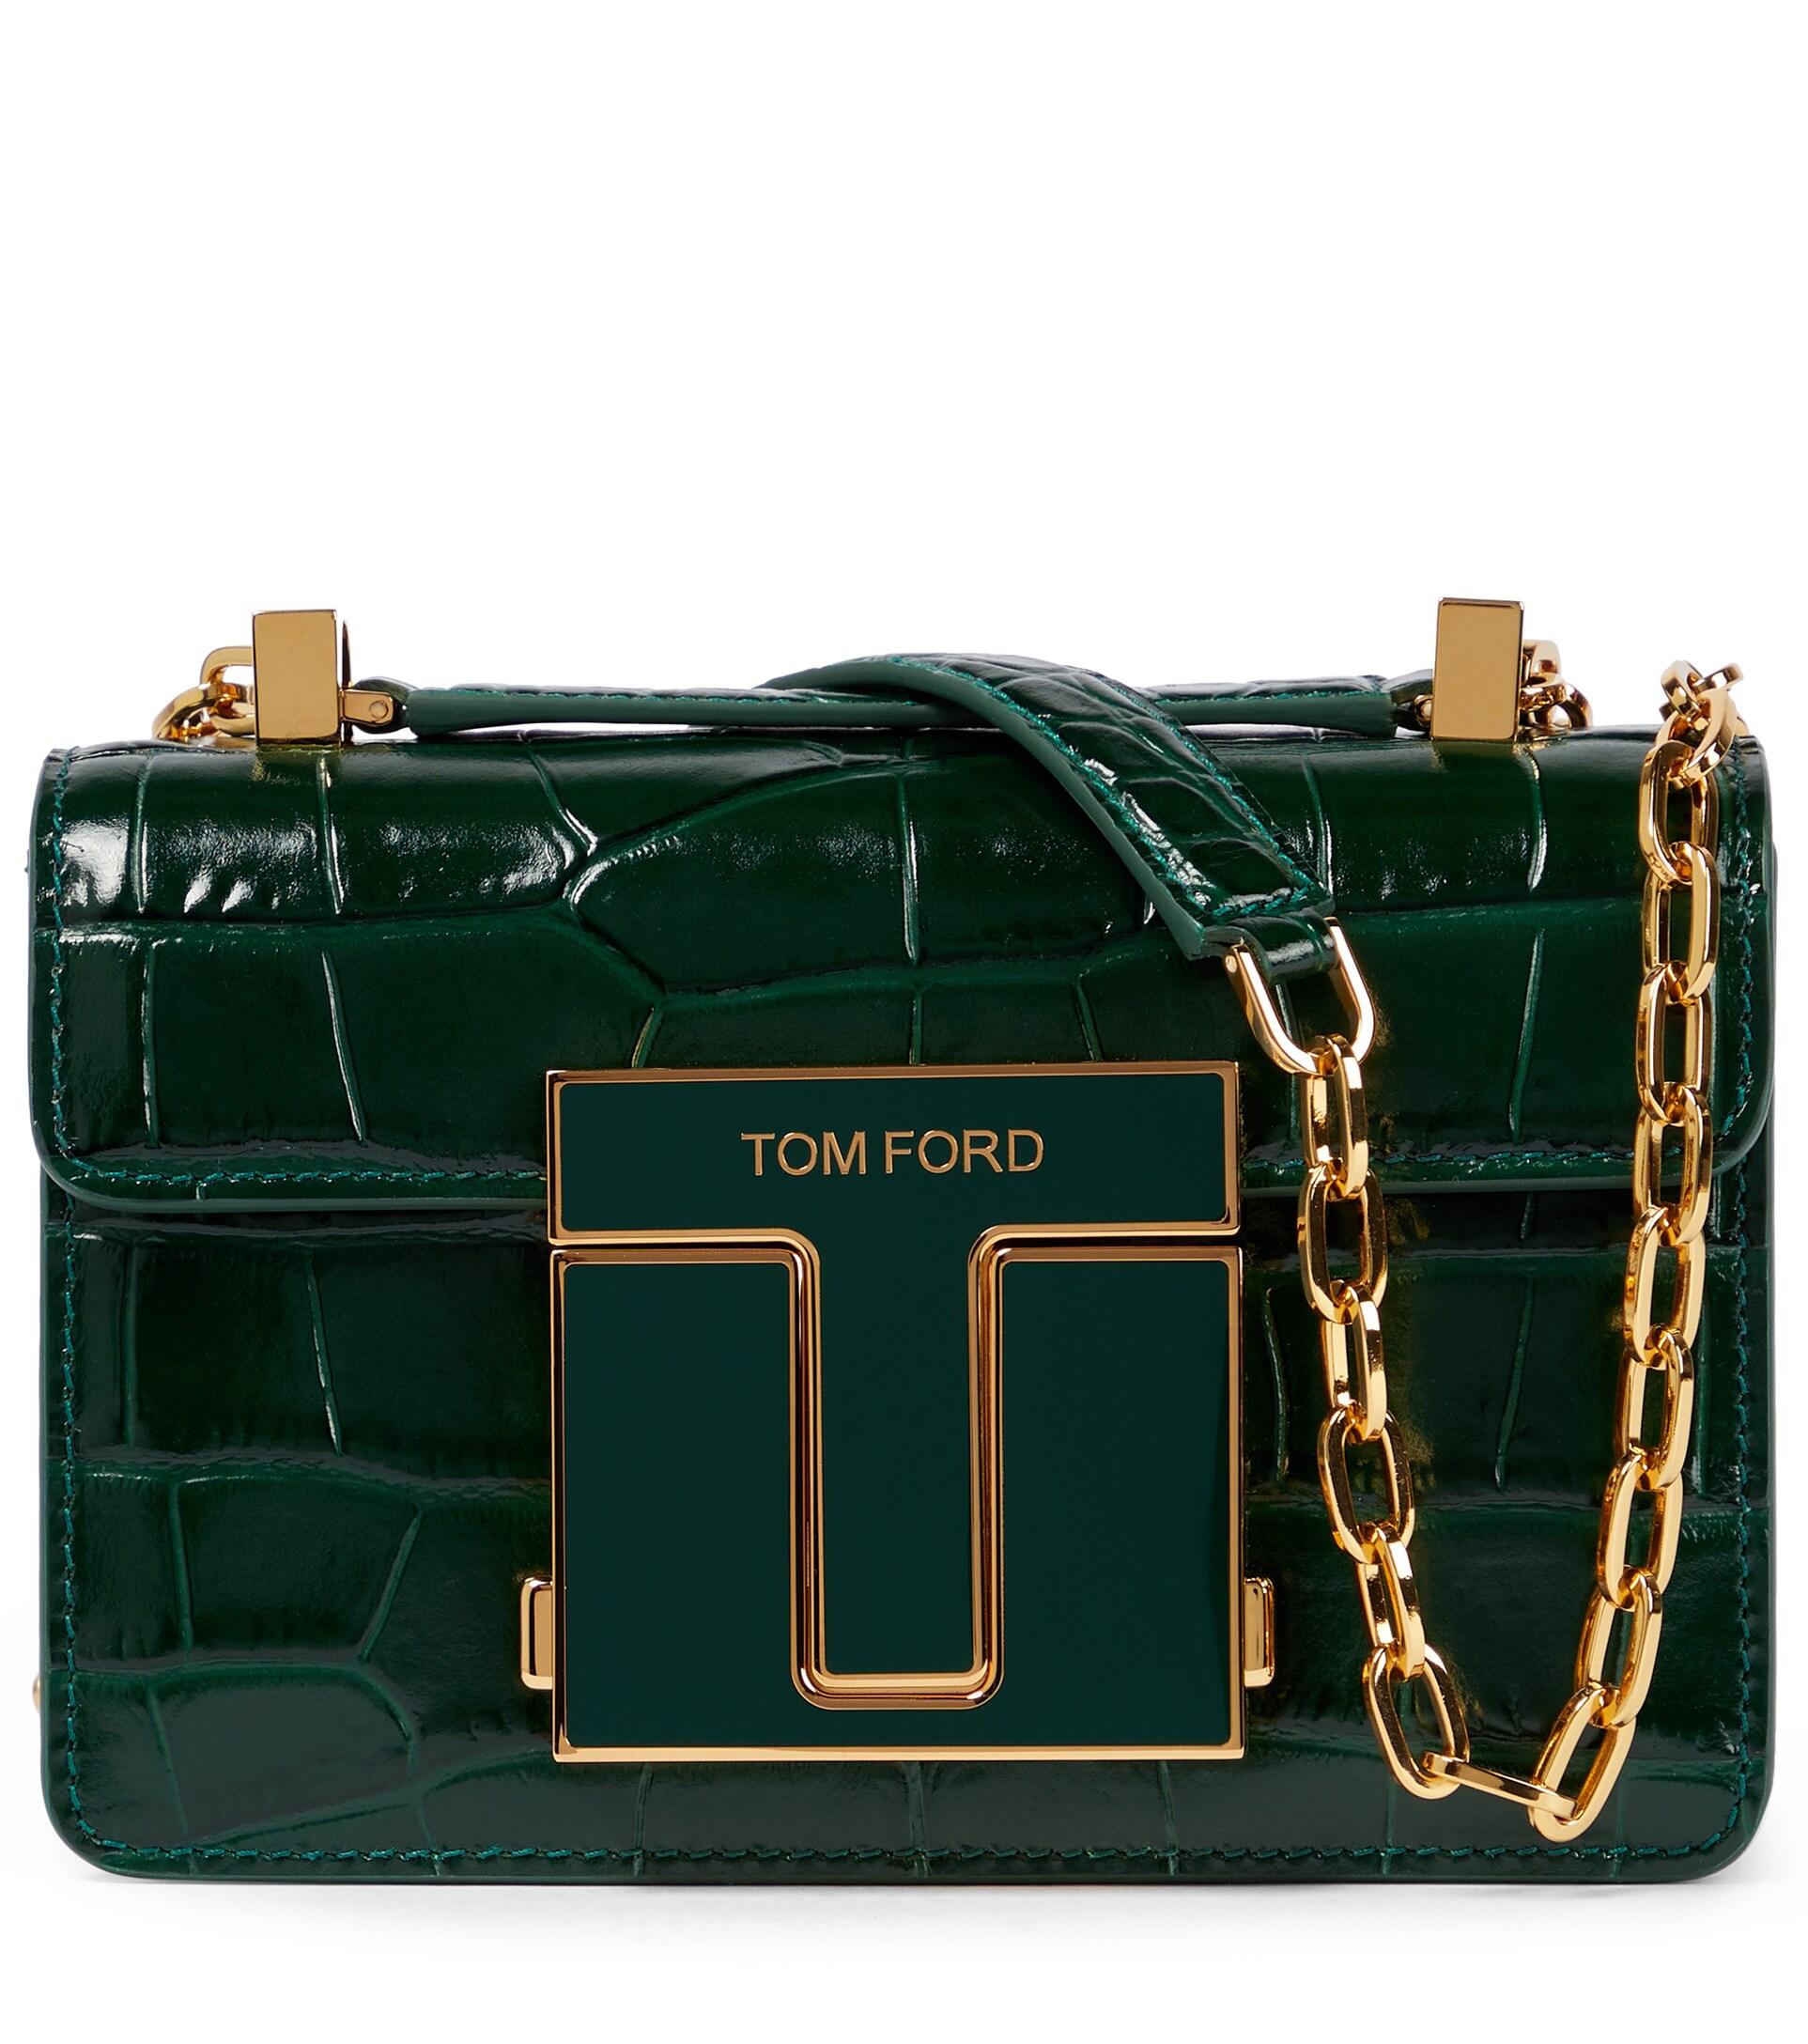 Tom Ford 001 Small Leather Shoulder Bag in Green | Lyst